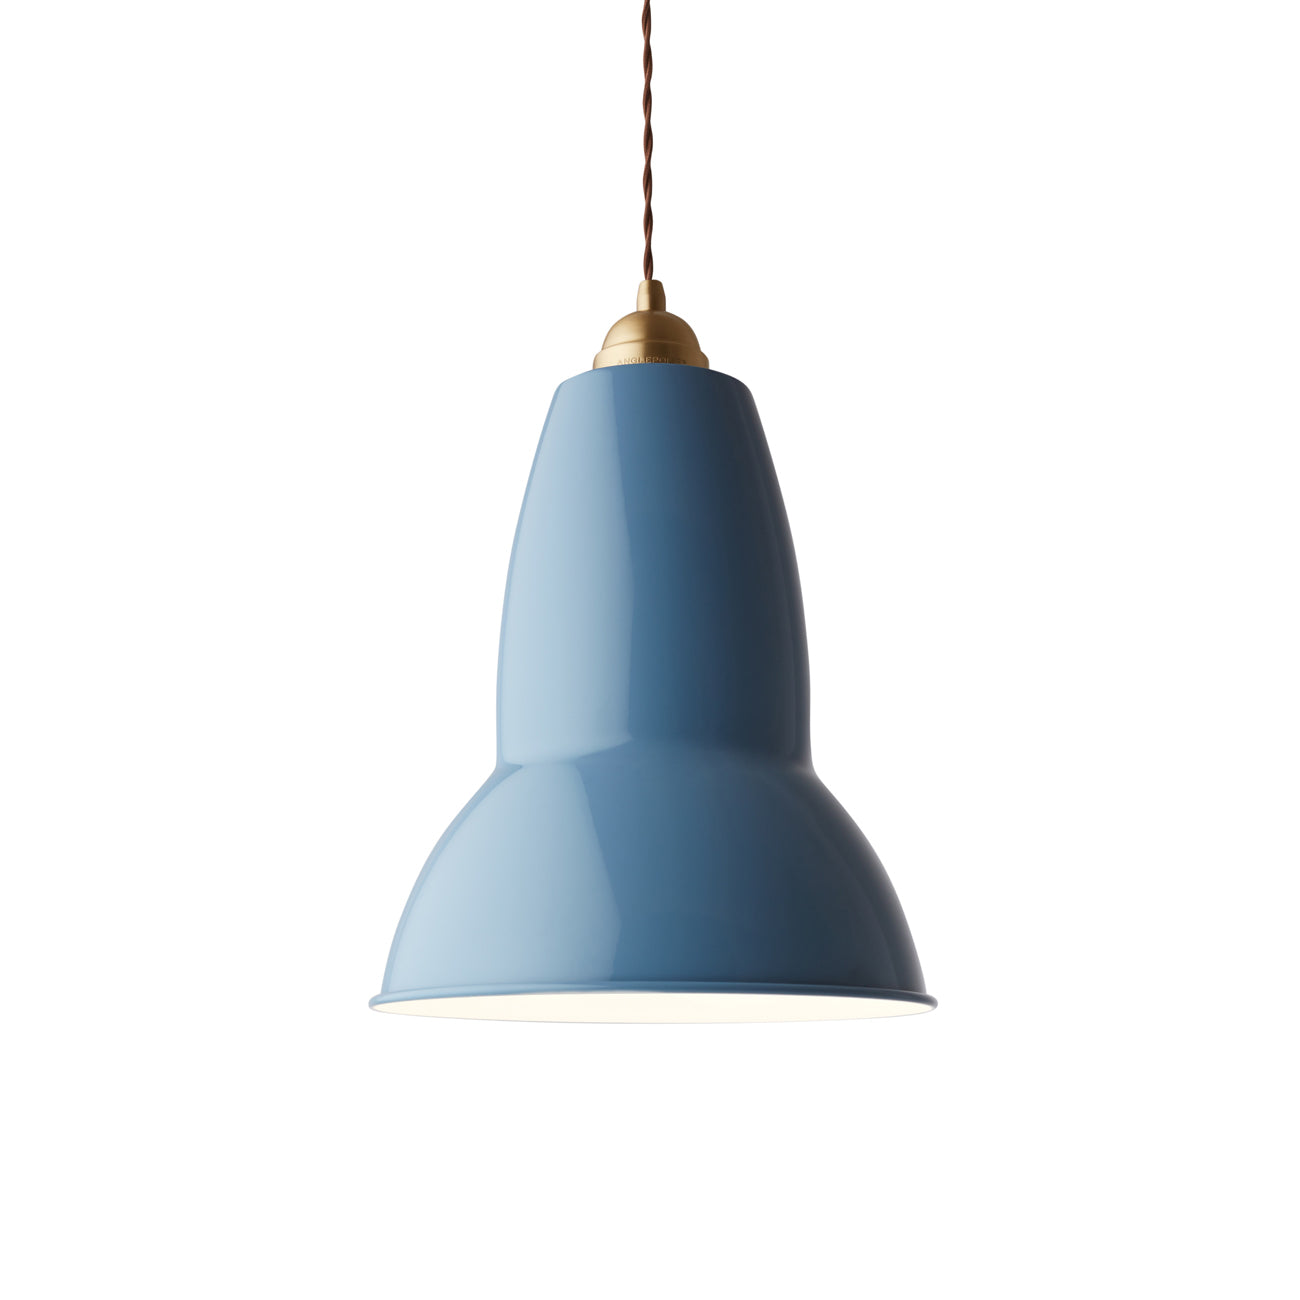 Anglepoise Giant 1227 pendant light in dusty blue with brass detail from Warehouse Home